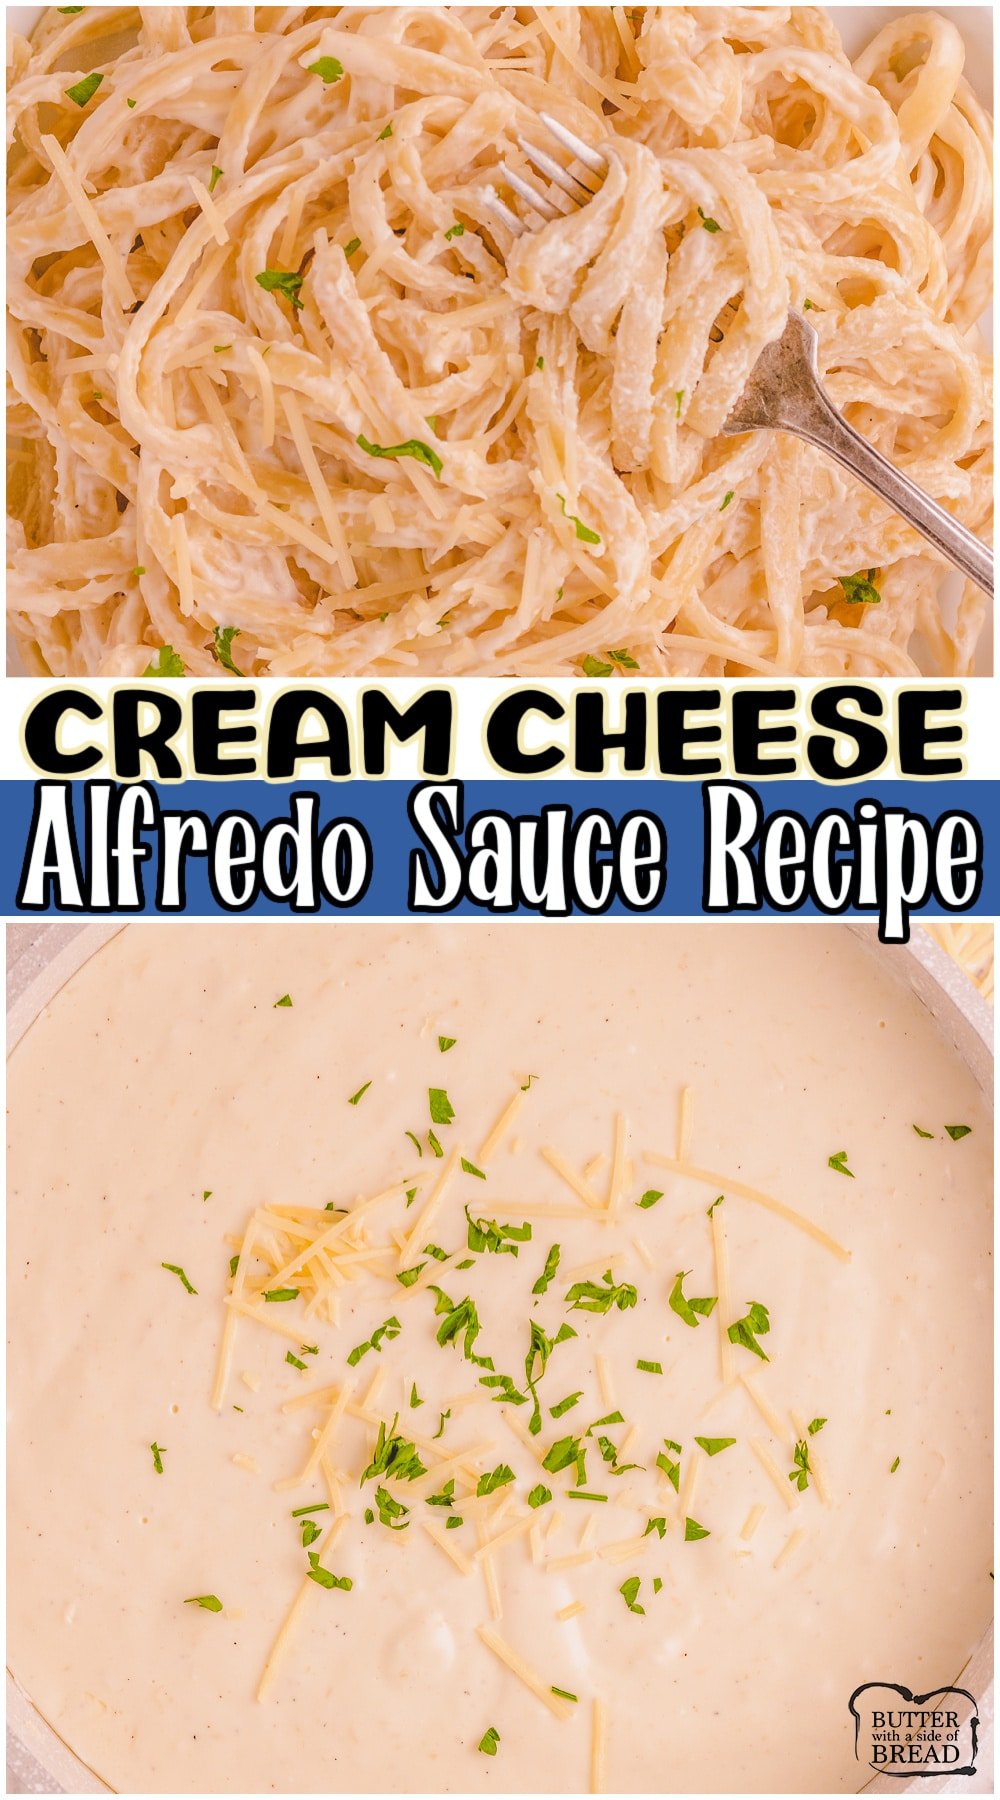 Homemade Cream Cheese Alfredo Sauce made with simple ingredients like butter, milk & Parmesan cheese! Cream Cheese adds a smooth & creamy texture to this easy, flavorful Alfredo sauce recipe.